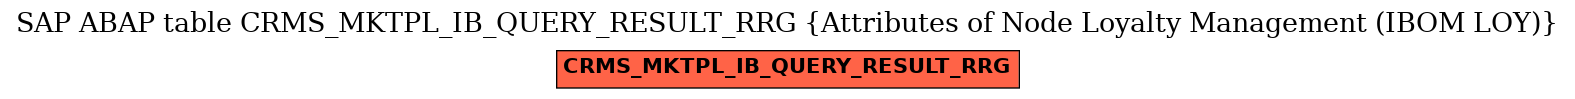 E-R Diagram for table CRMS_MKTPL_IB_QUERY_RESULT_RRG (Attributes of Node Loyalty Management (IBOM LOY))